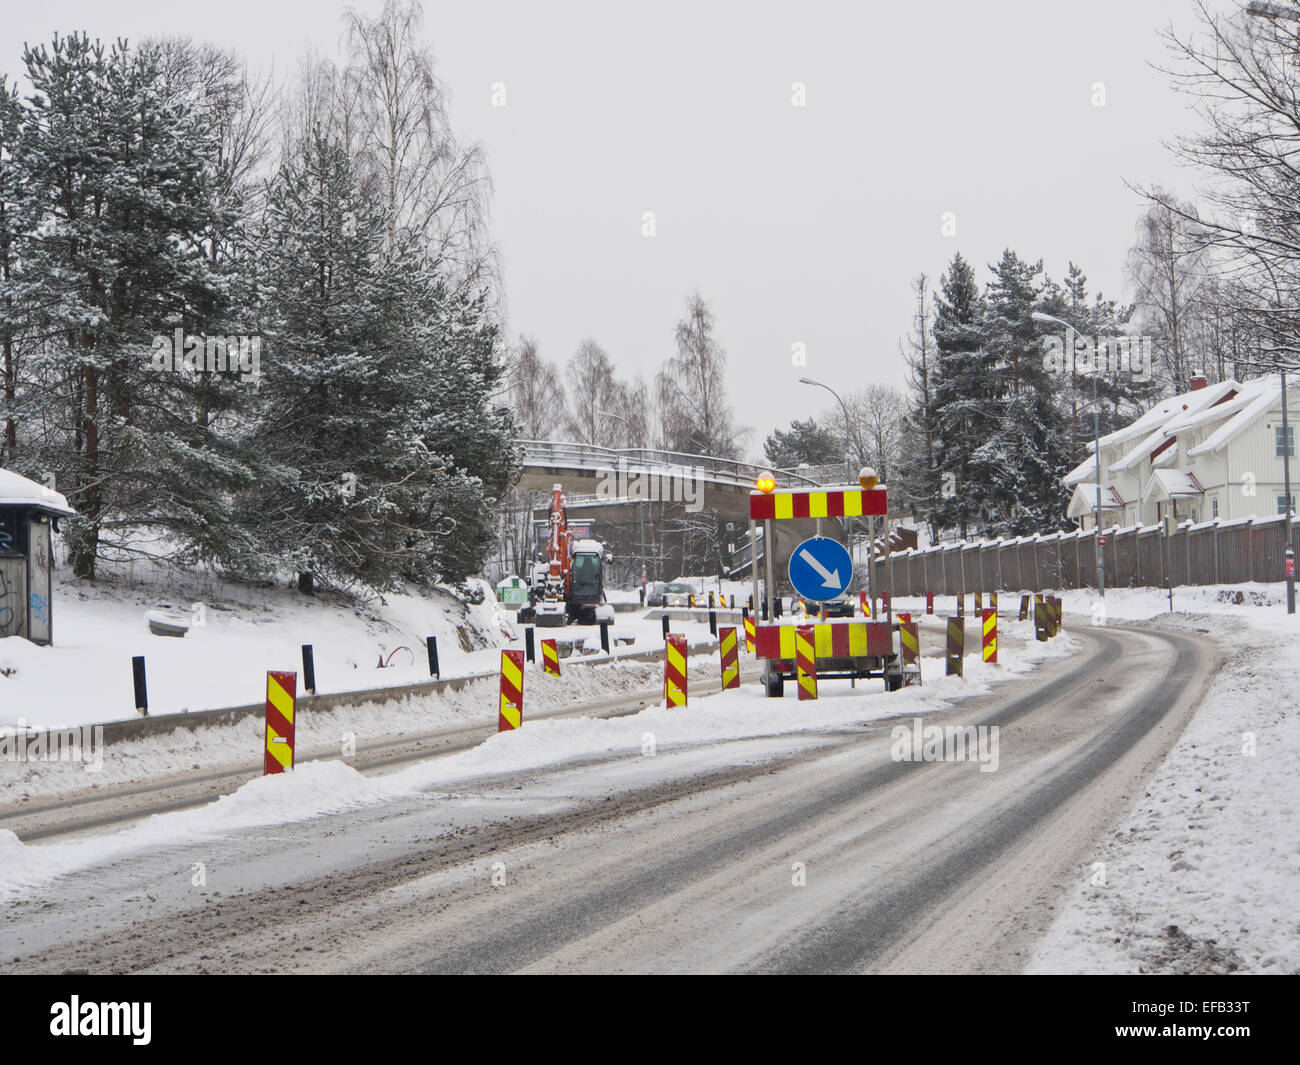 Winter roadworks, necessary but snow brings extra challenges for motorists and workers alike, Oslo Norway Stock Photo